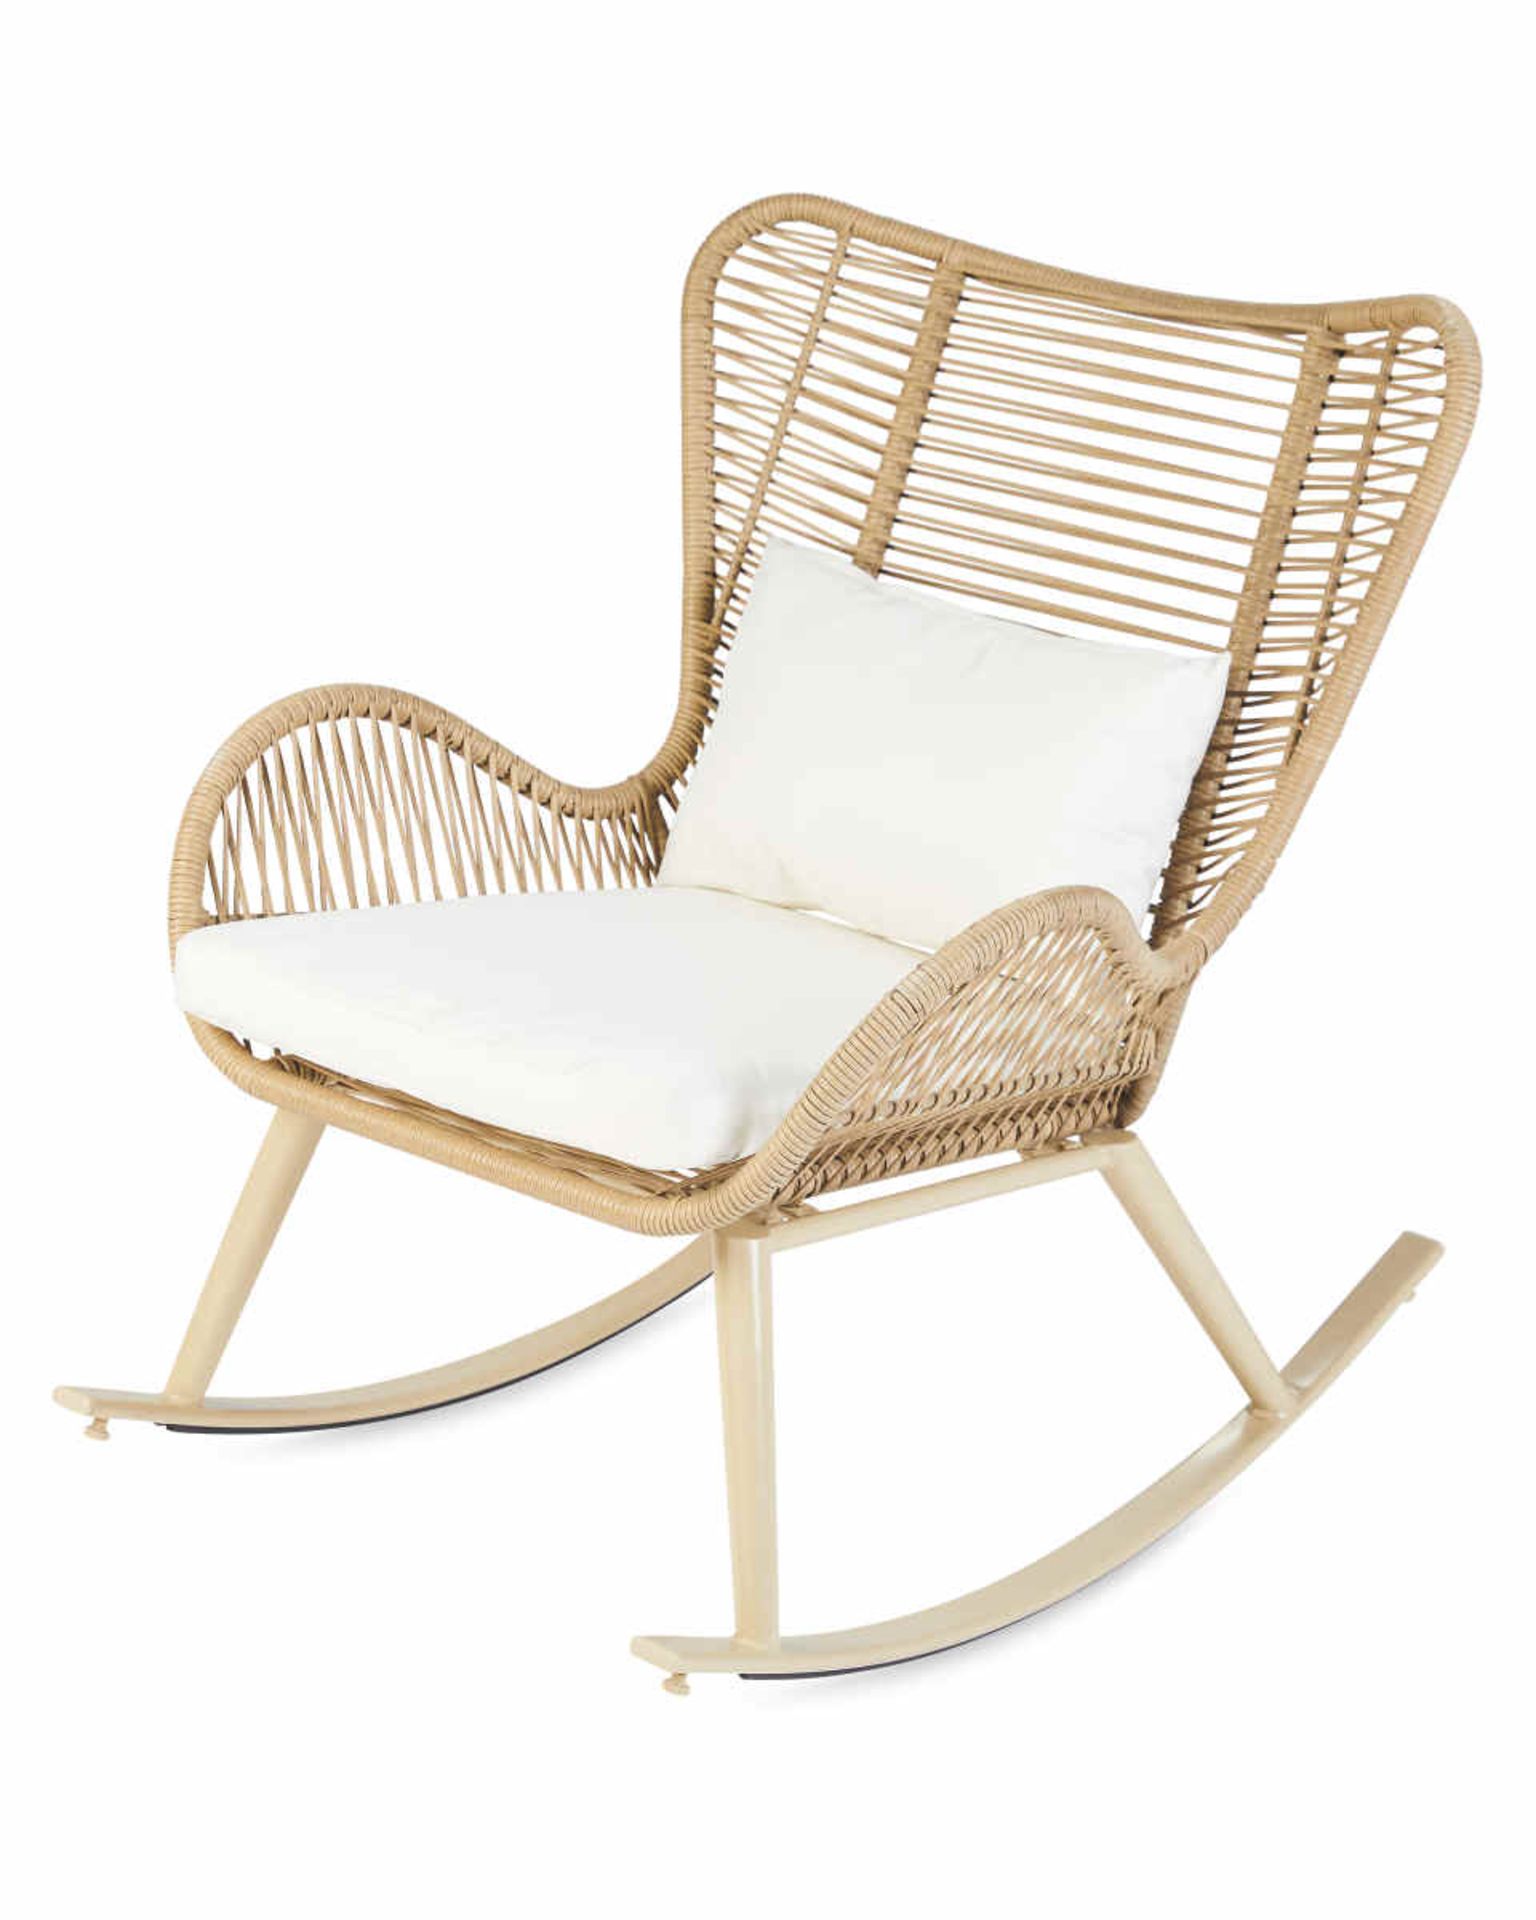 Rope Effect Rocking Chair. This Rope Effect Rocking Chair is this seasons must have for that